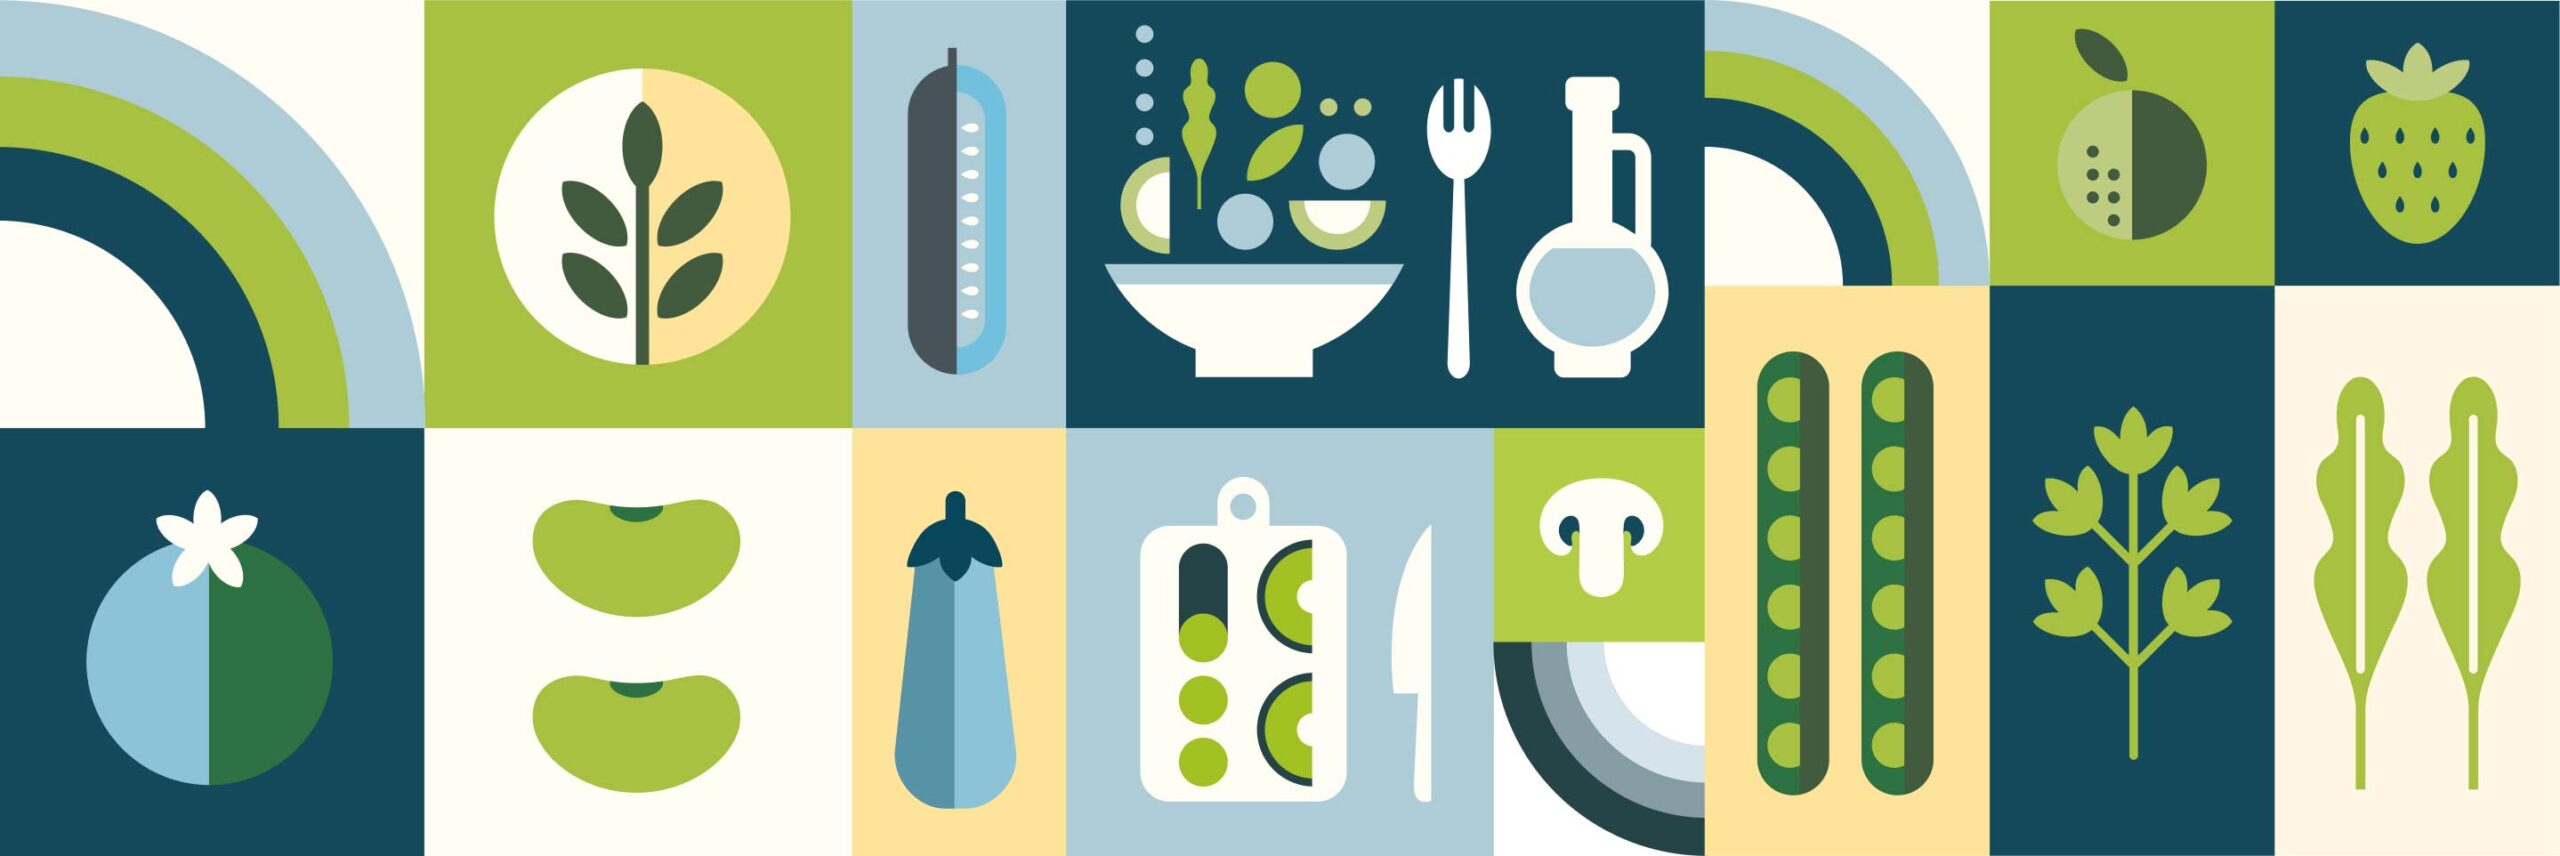 Eatwell brand illustrations and icons